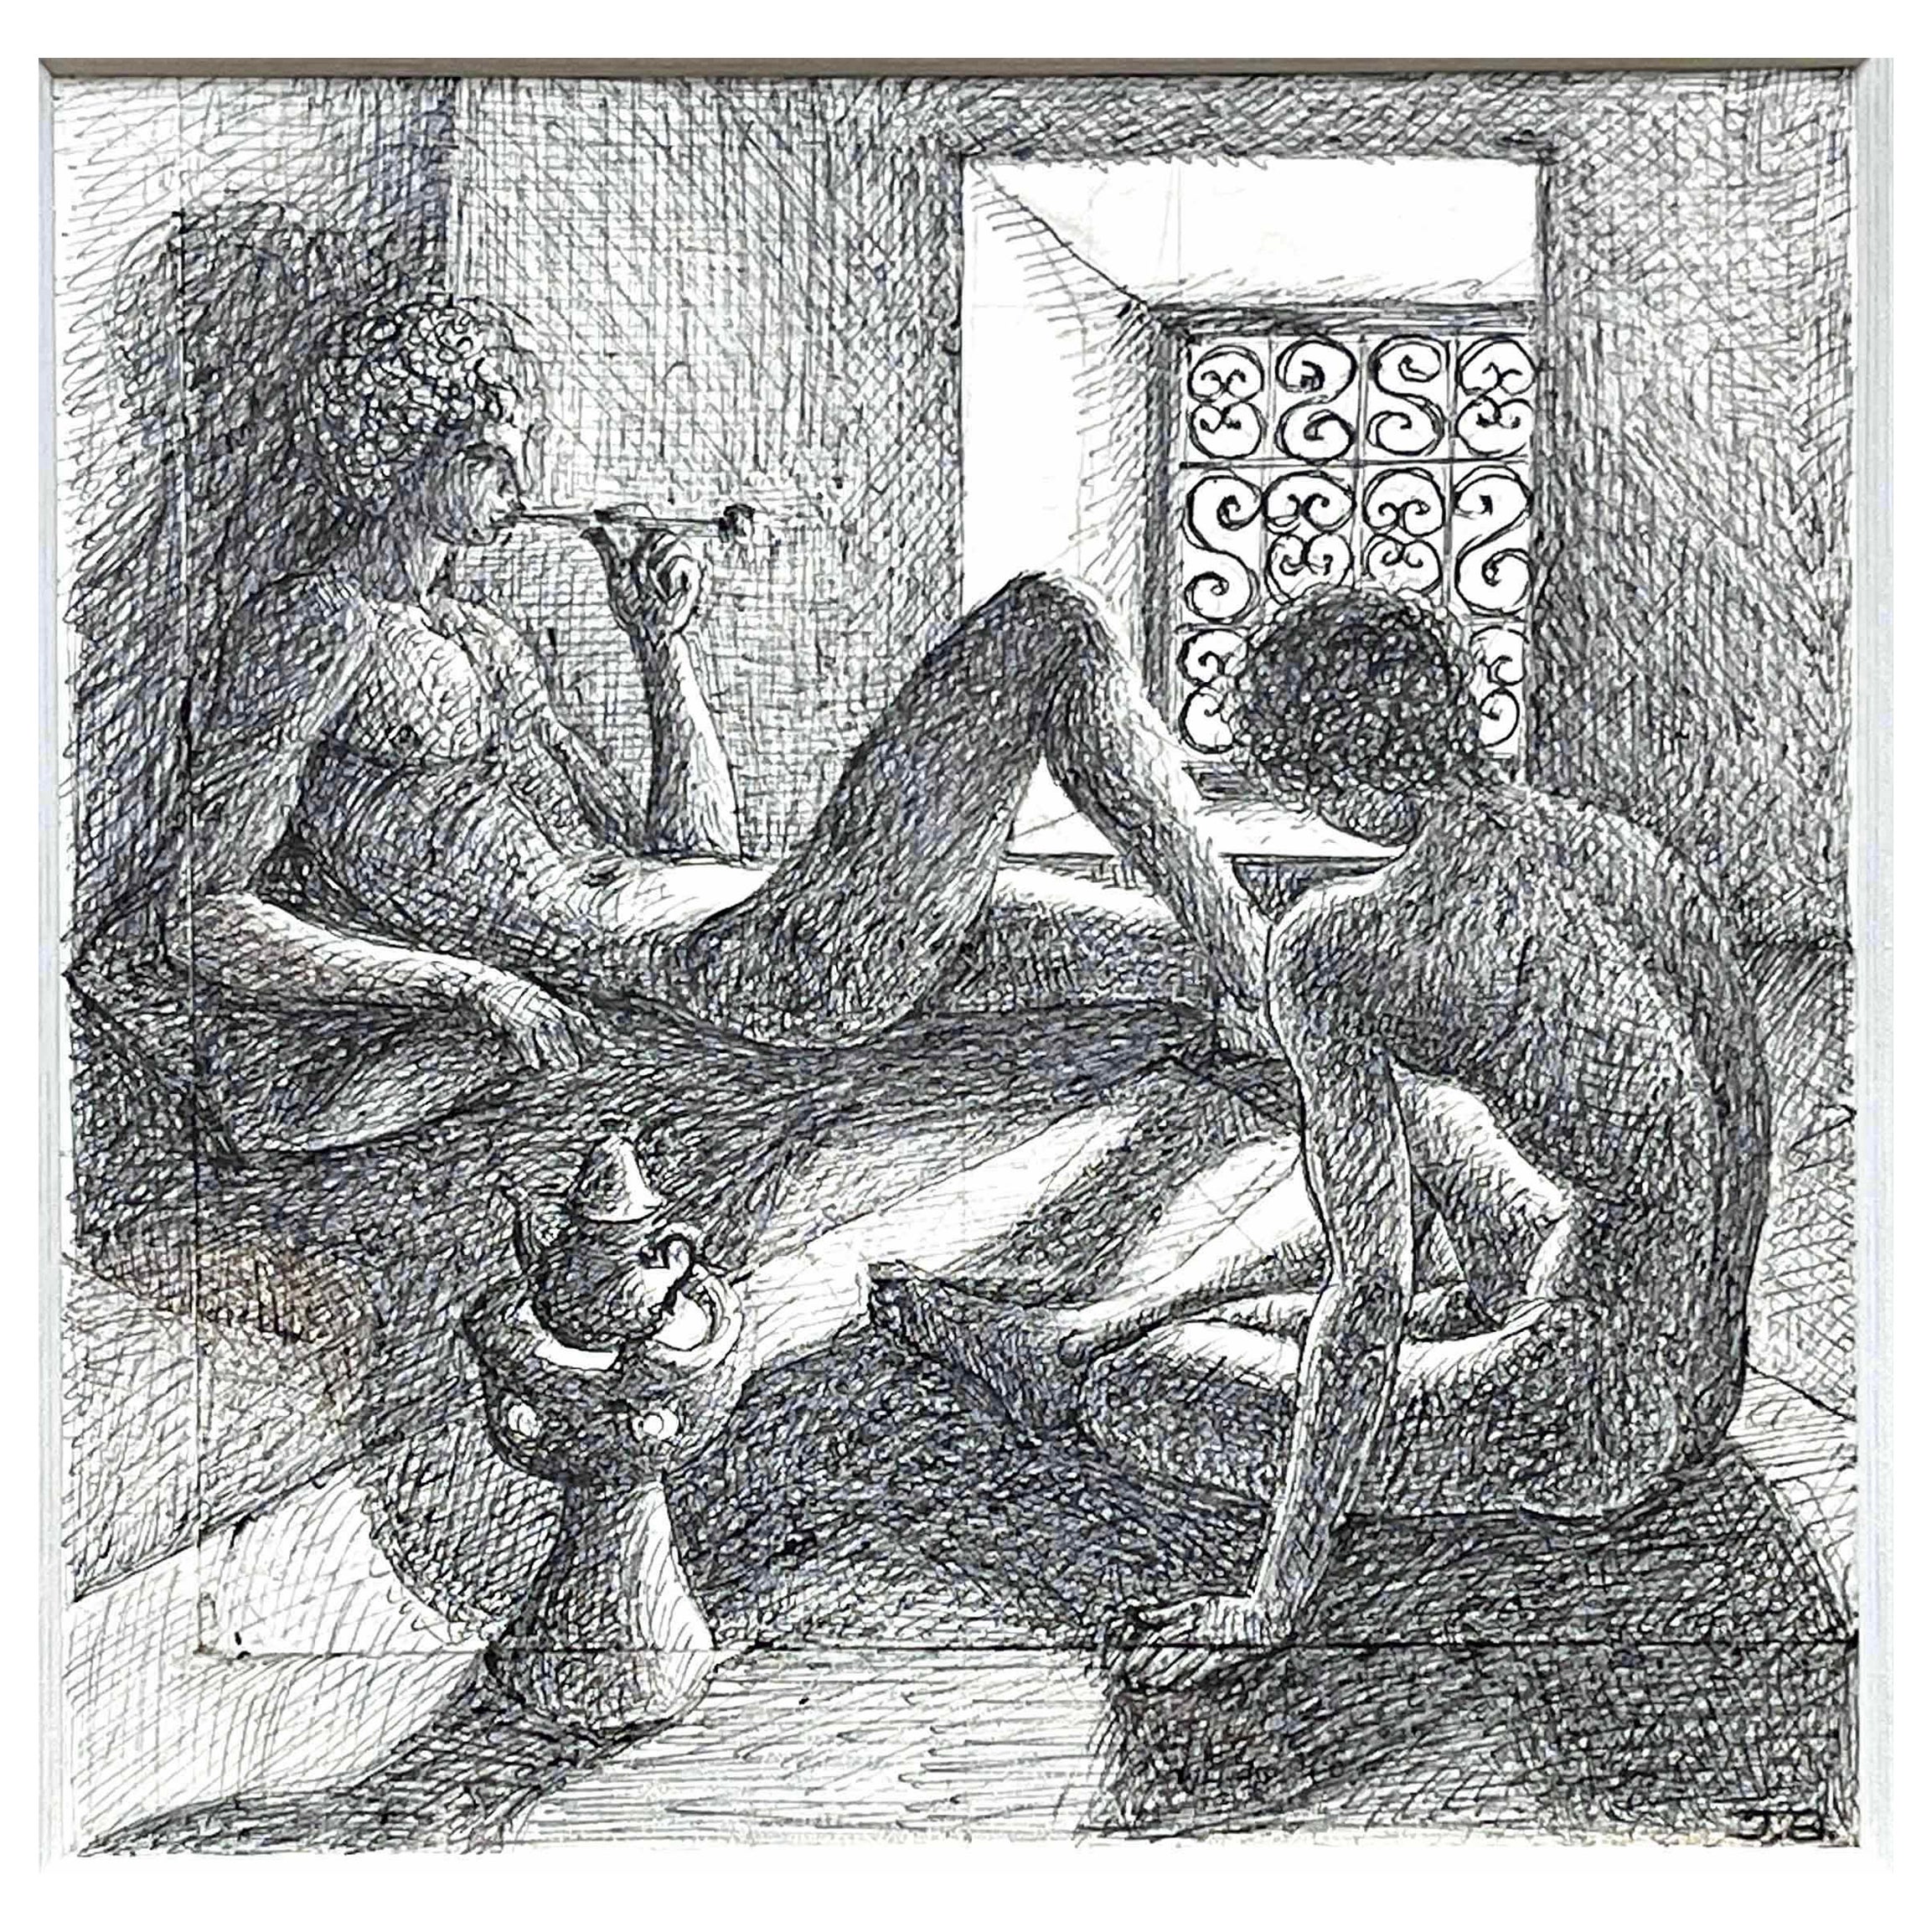 "Tea and Smoke in the Bath, " Important Scene in Moroccan Hammam by Azema